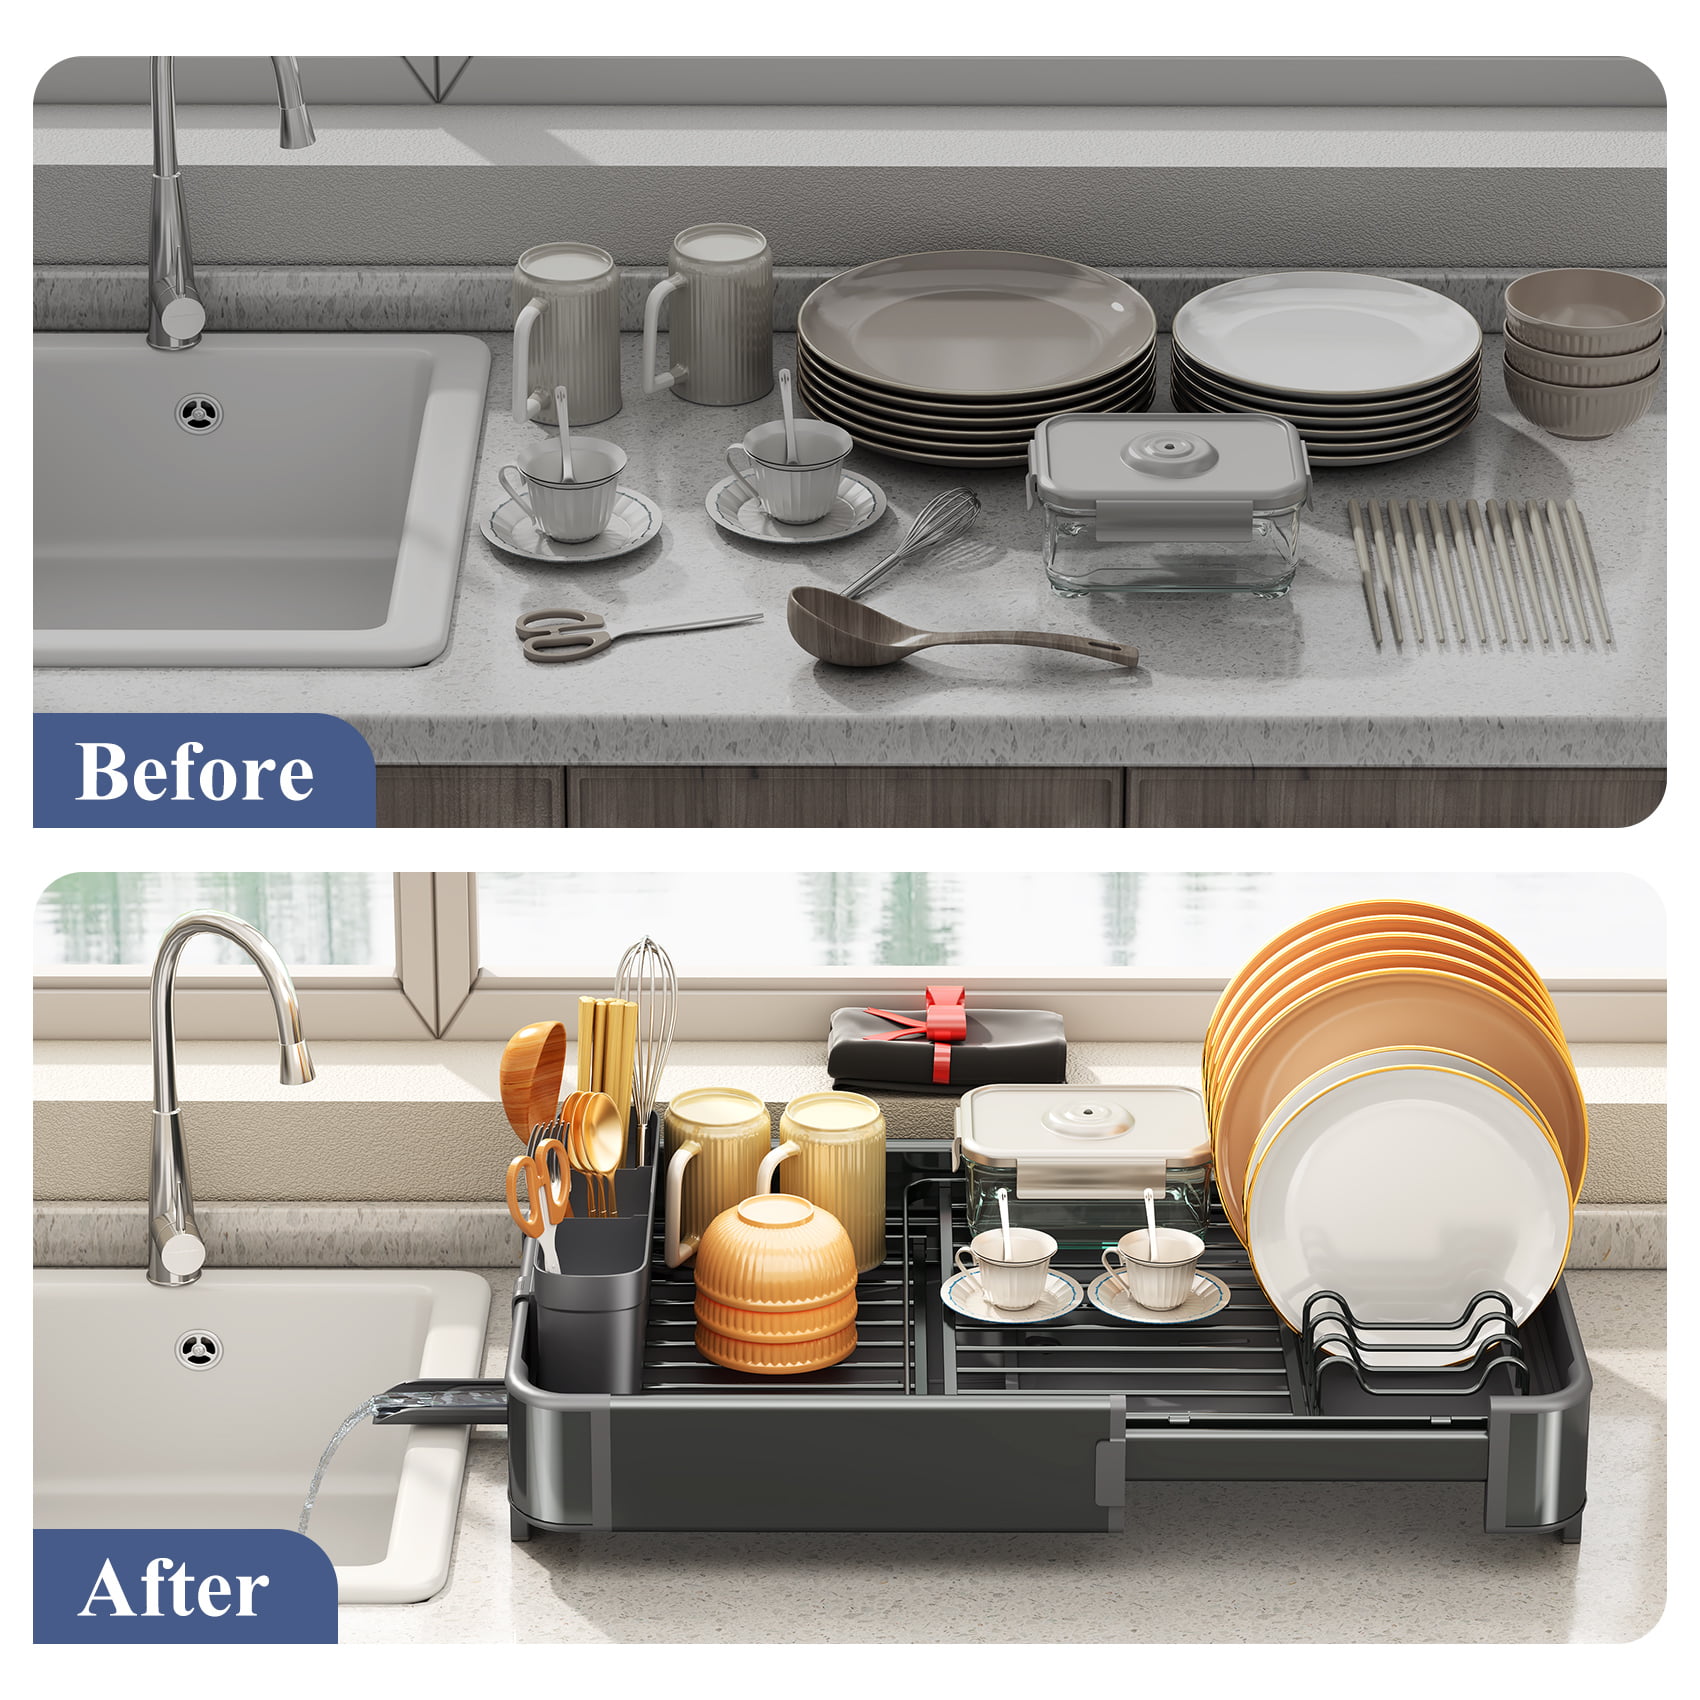  Klvied Dish Rack with Swivel Spout, Dish Drying Rack